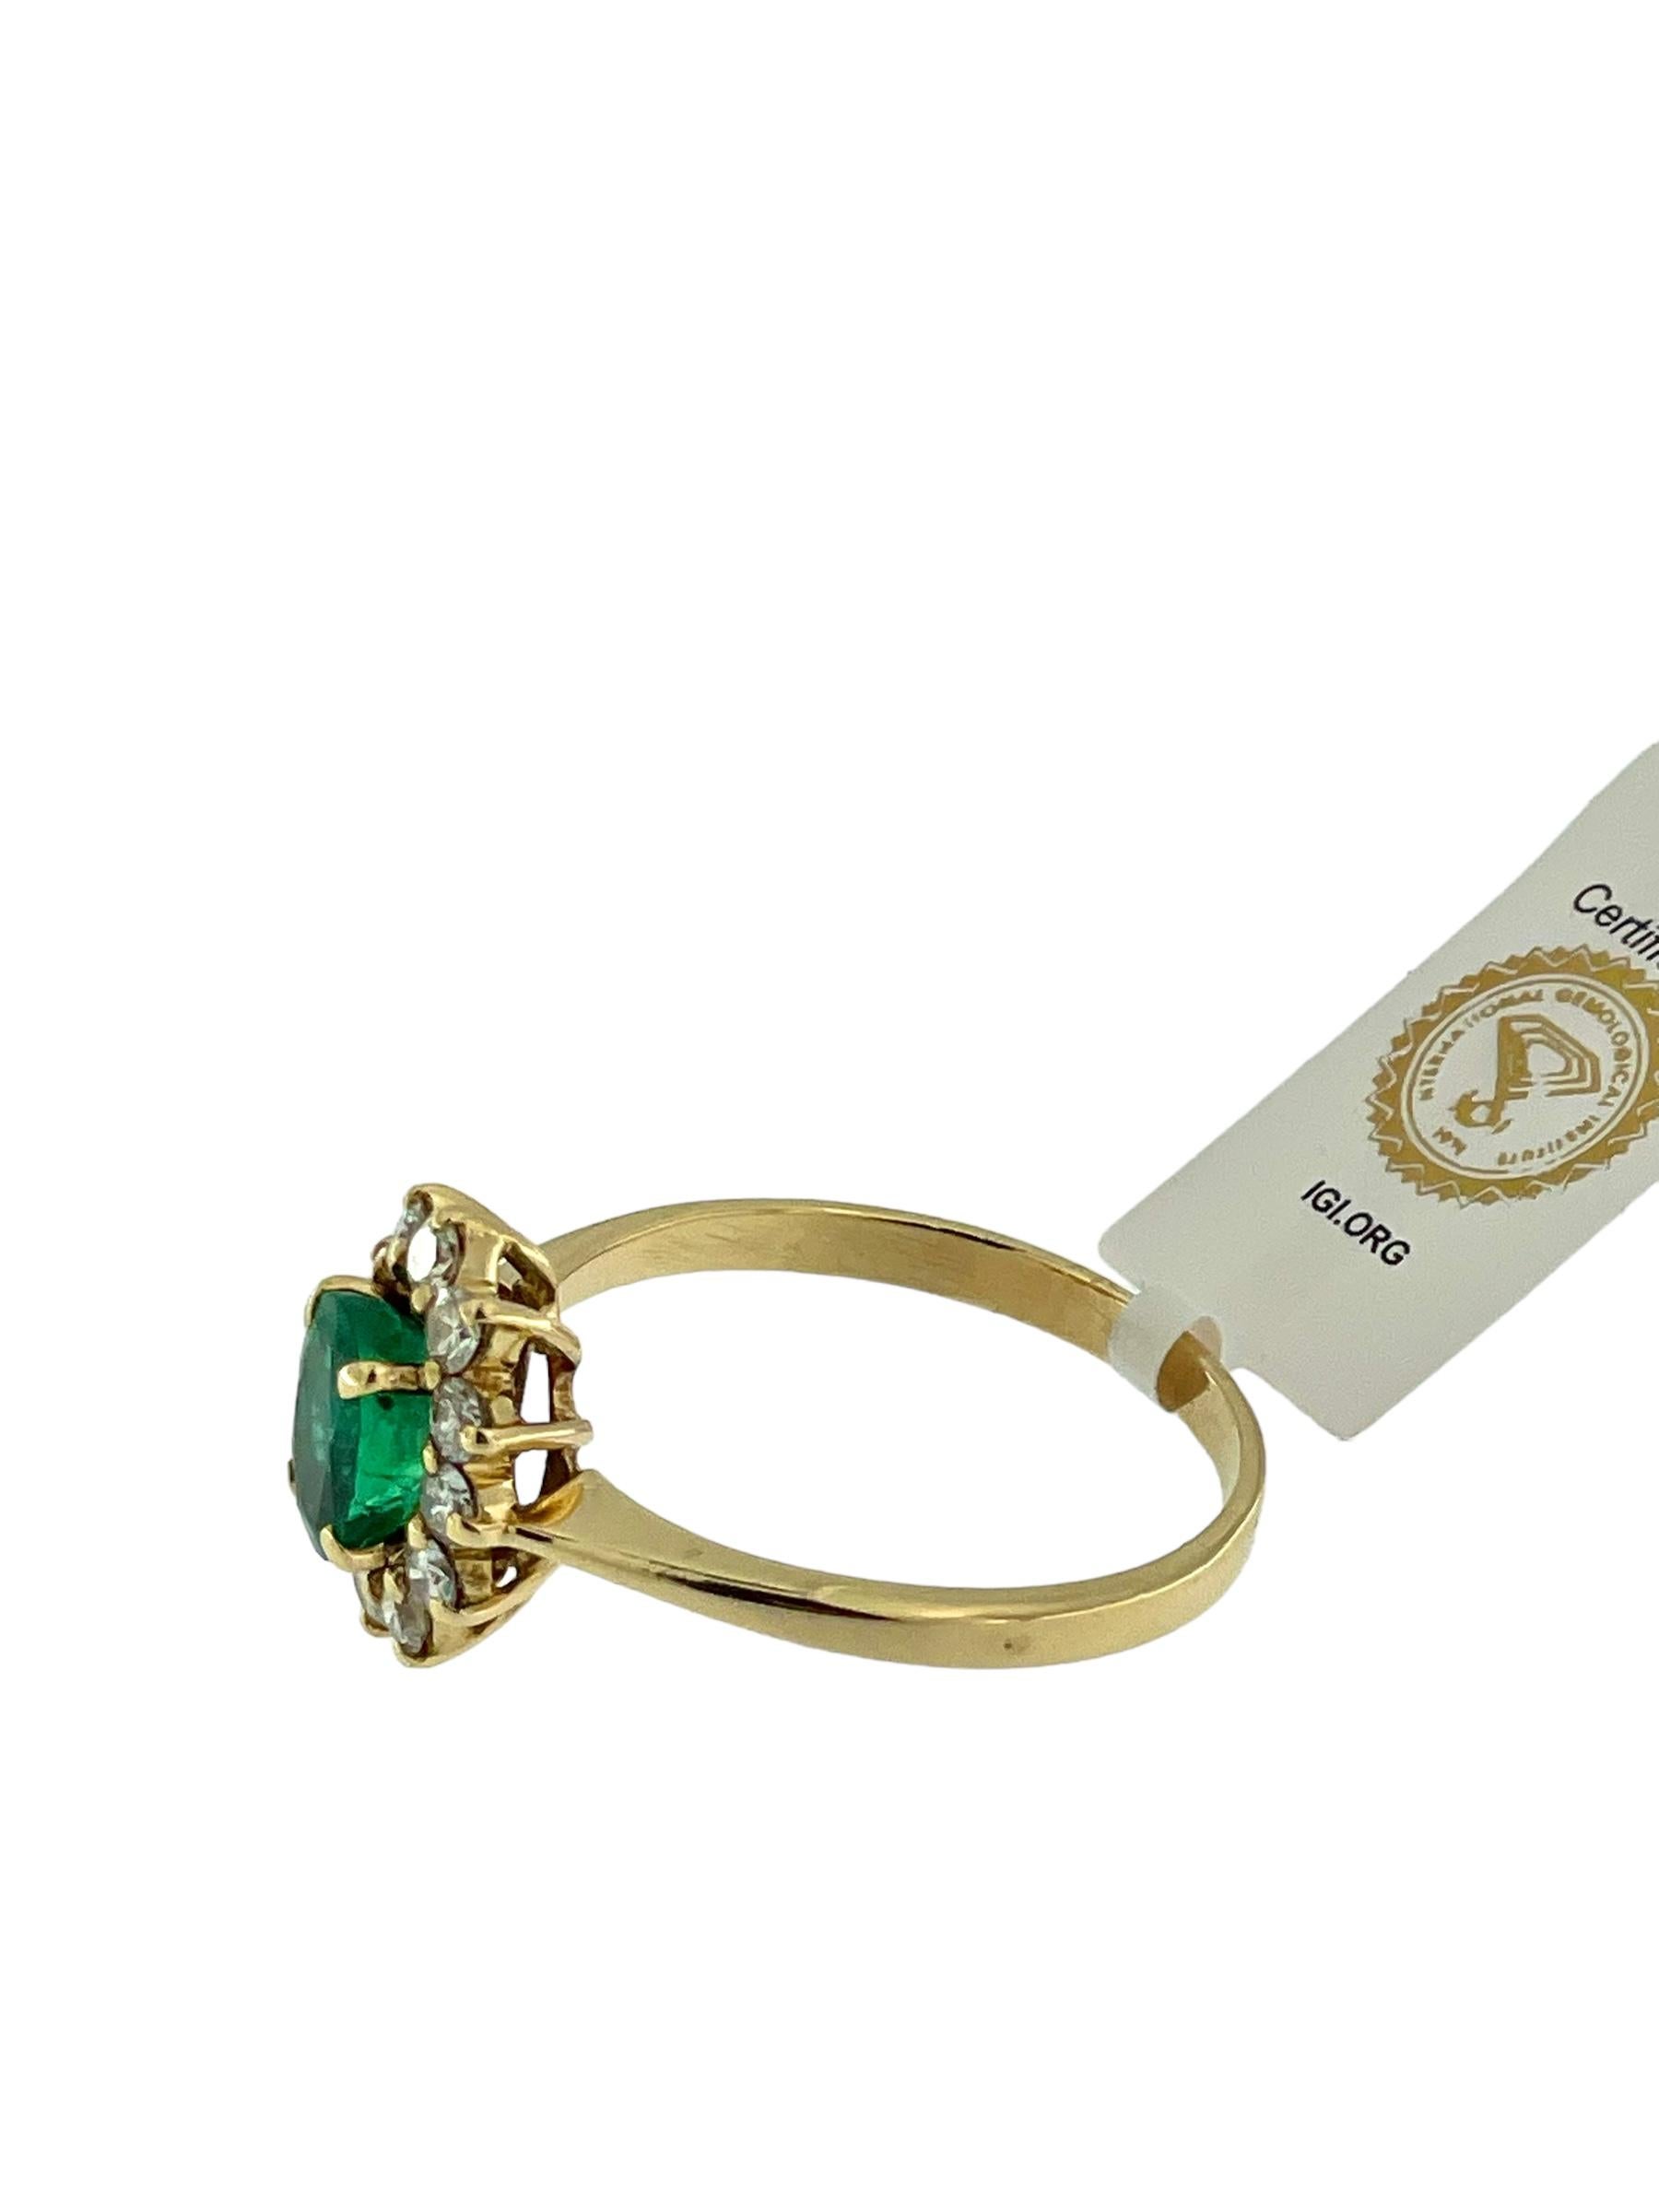 Women's or Men's Vintage Yellow Gold Ring with Emerald and Diamonds IGI Certified For Sale